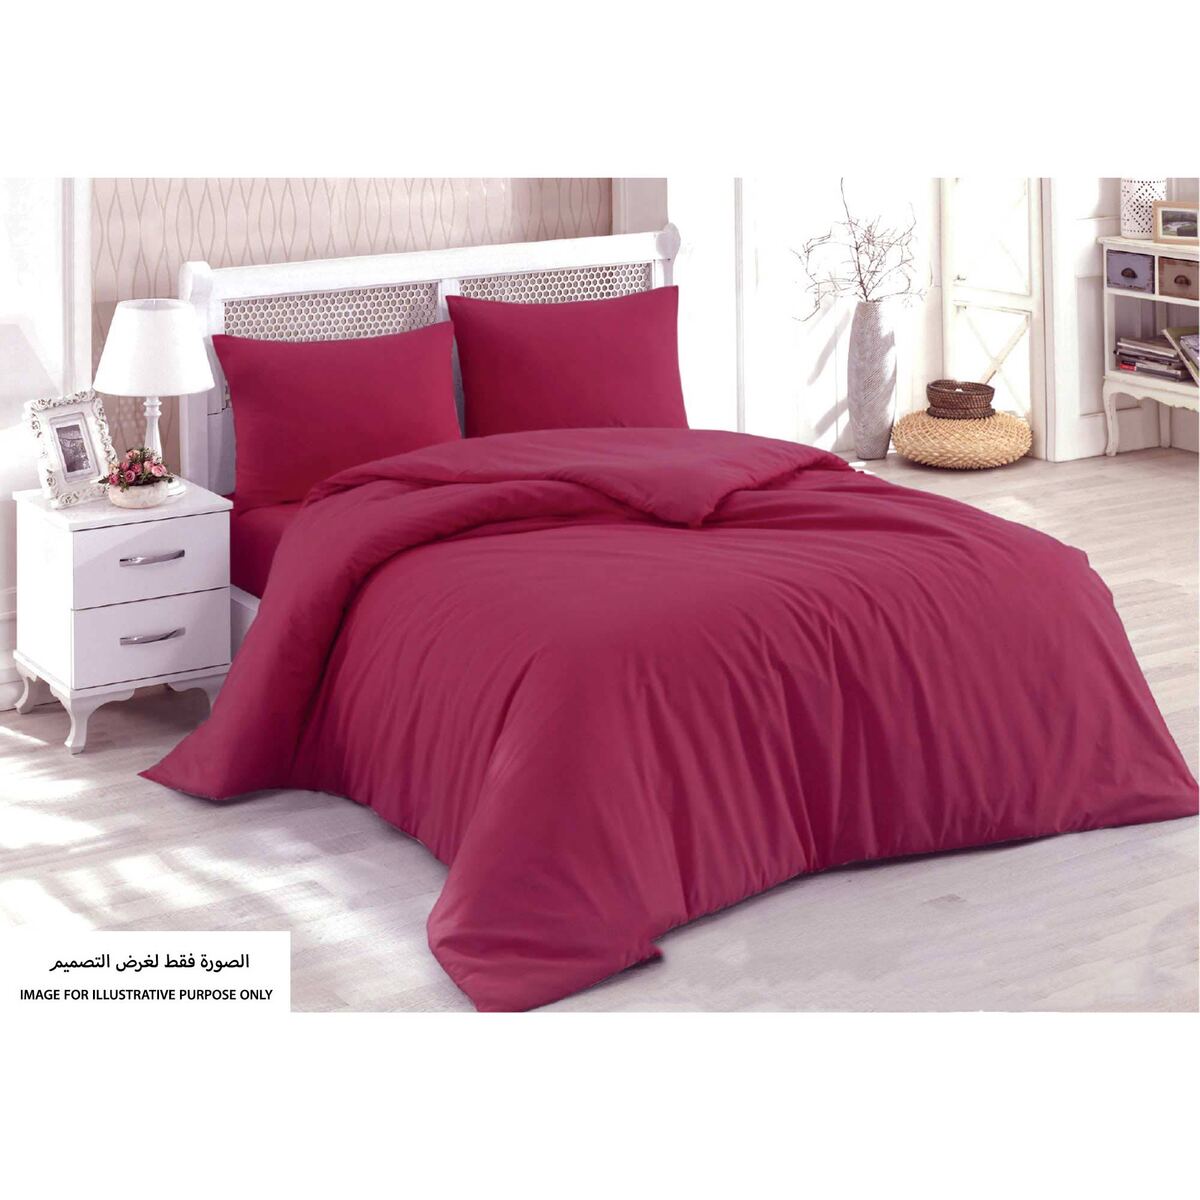 Homewell Quilt Cover King 3pc Set Red